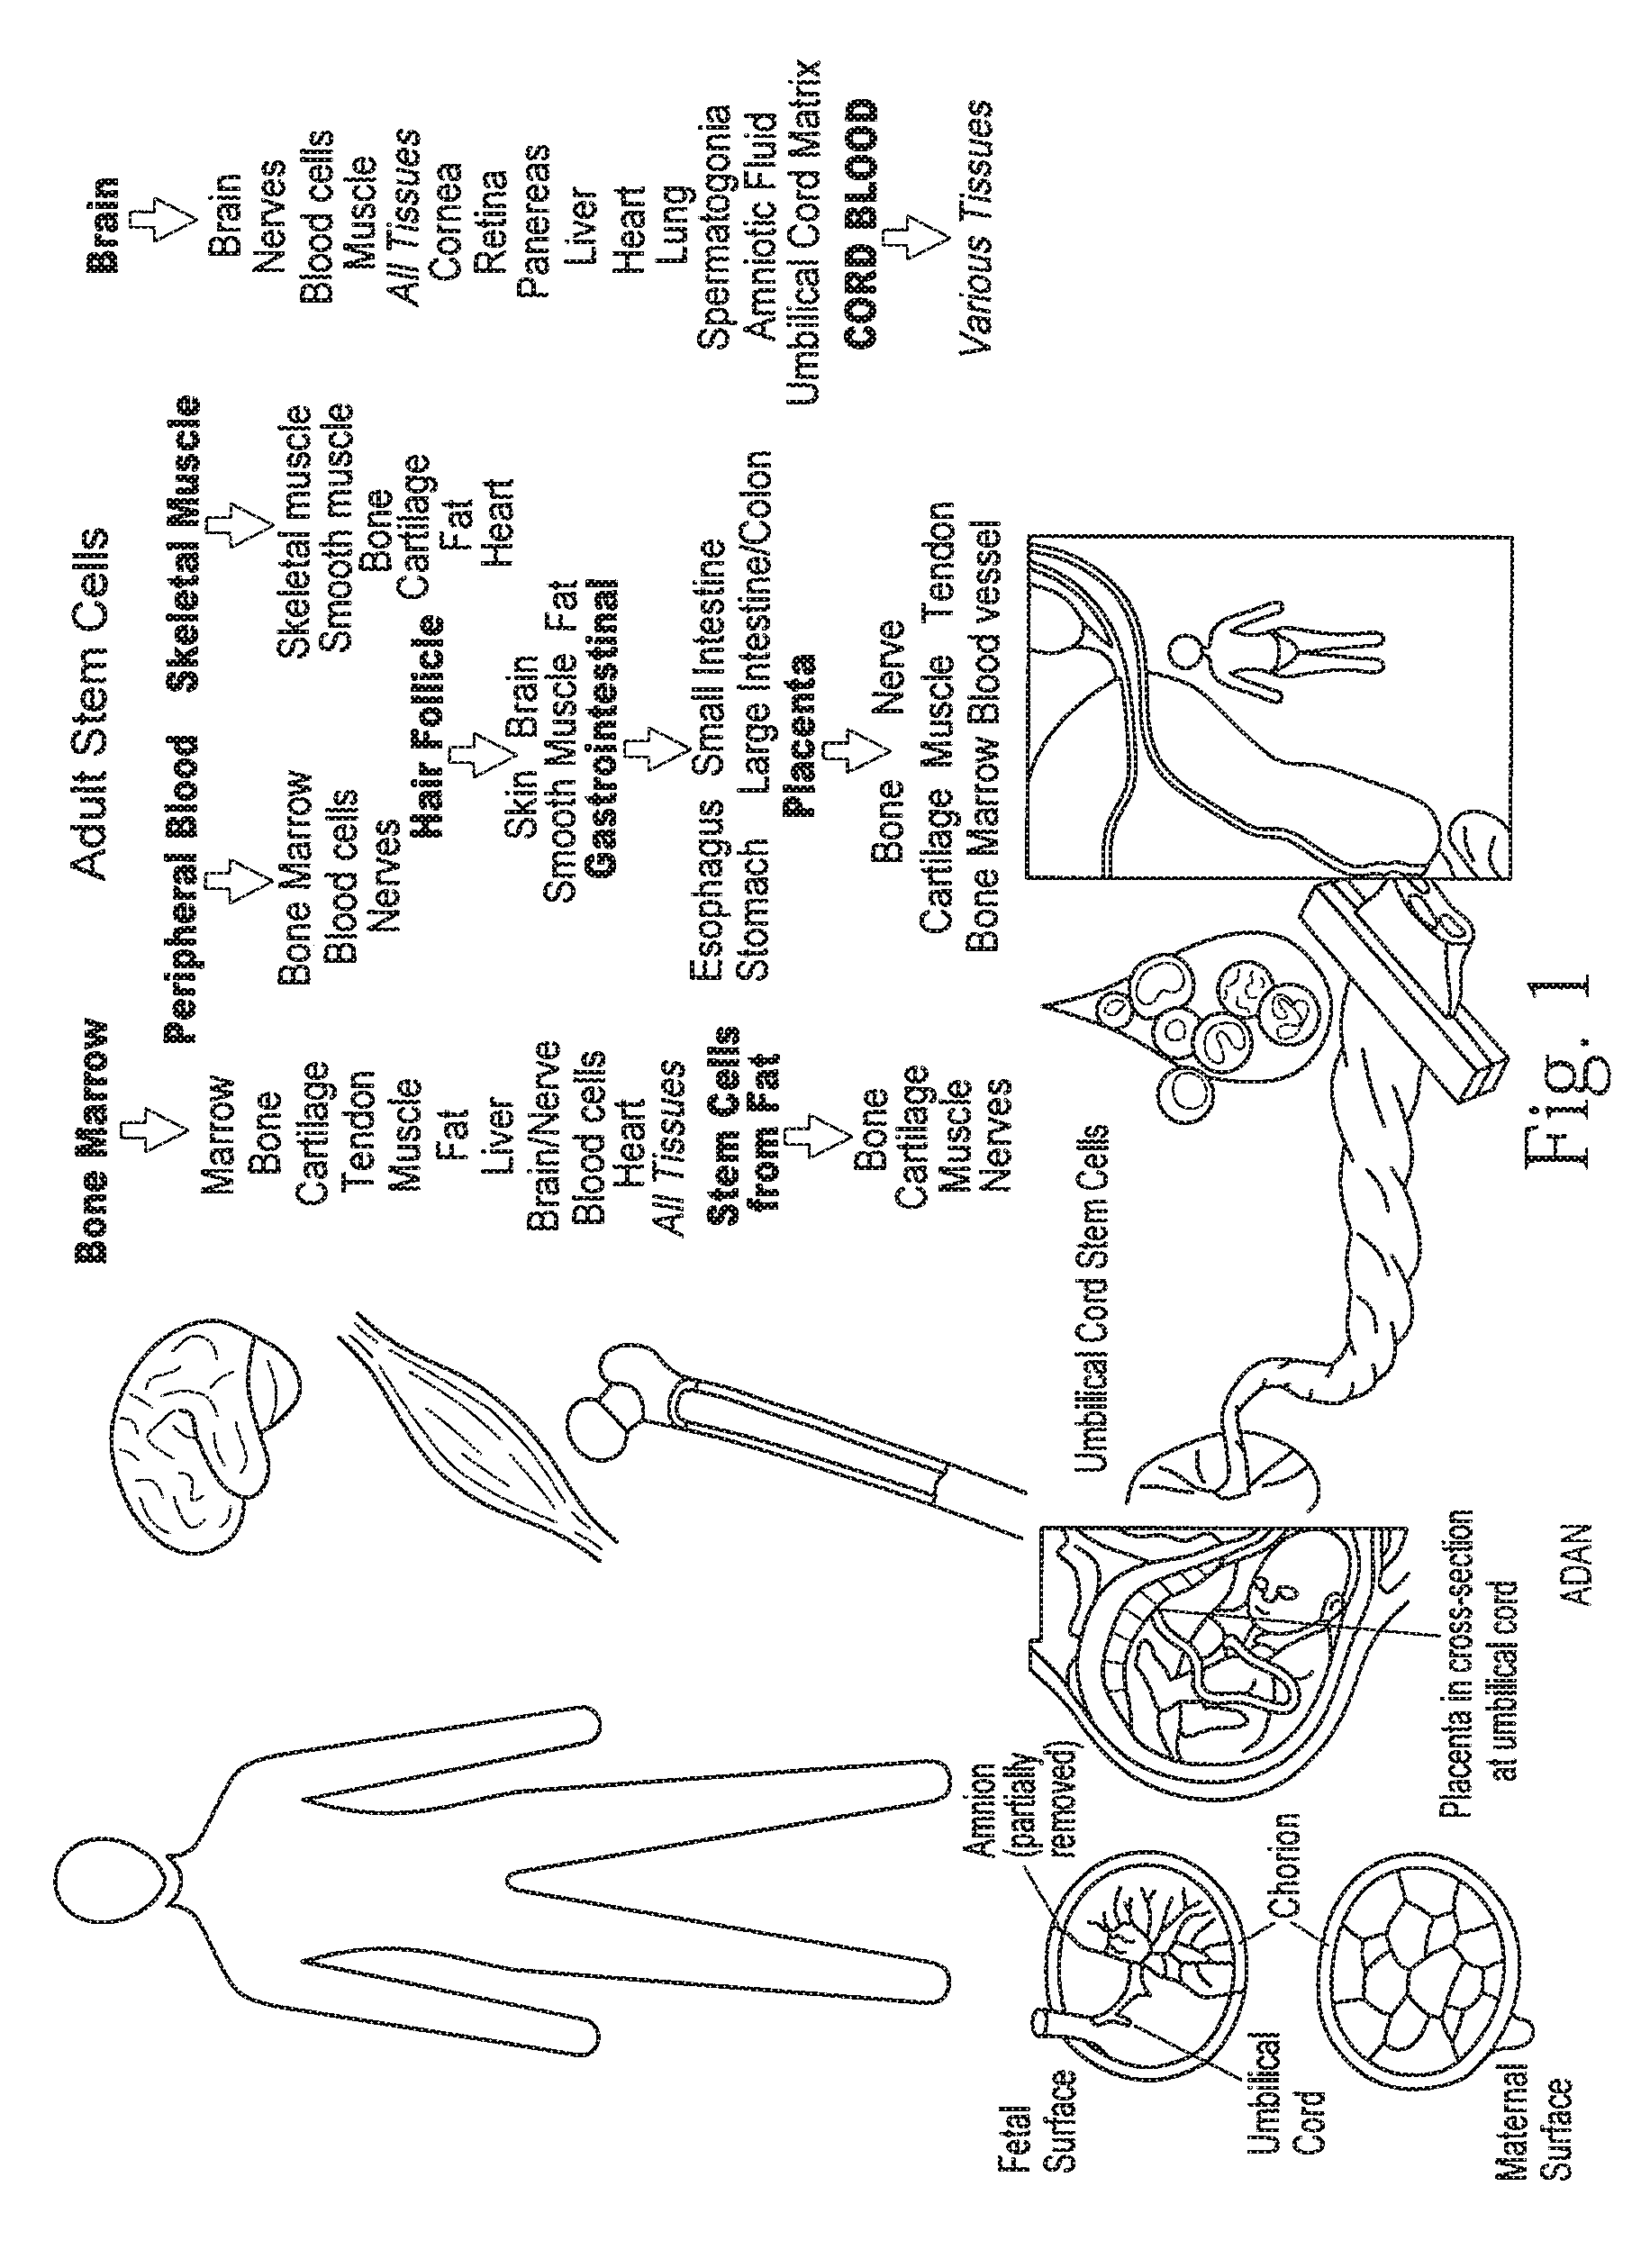 Methods of treating diseases or conditions using mesenchymal stem cells